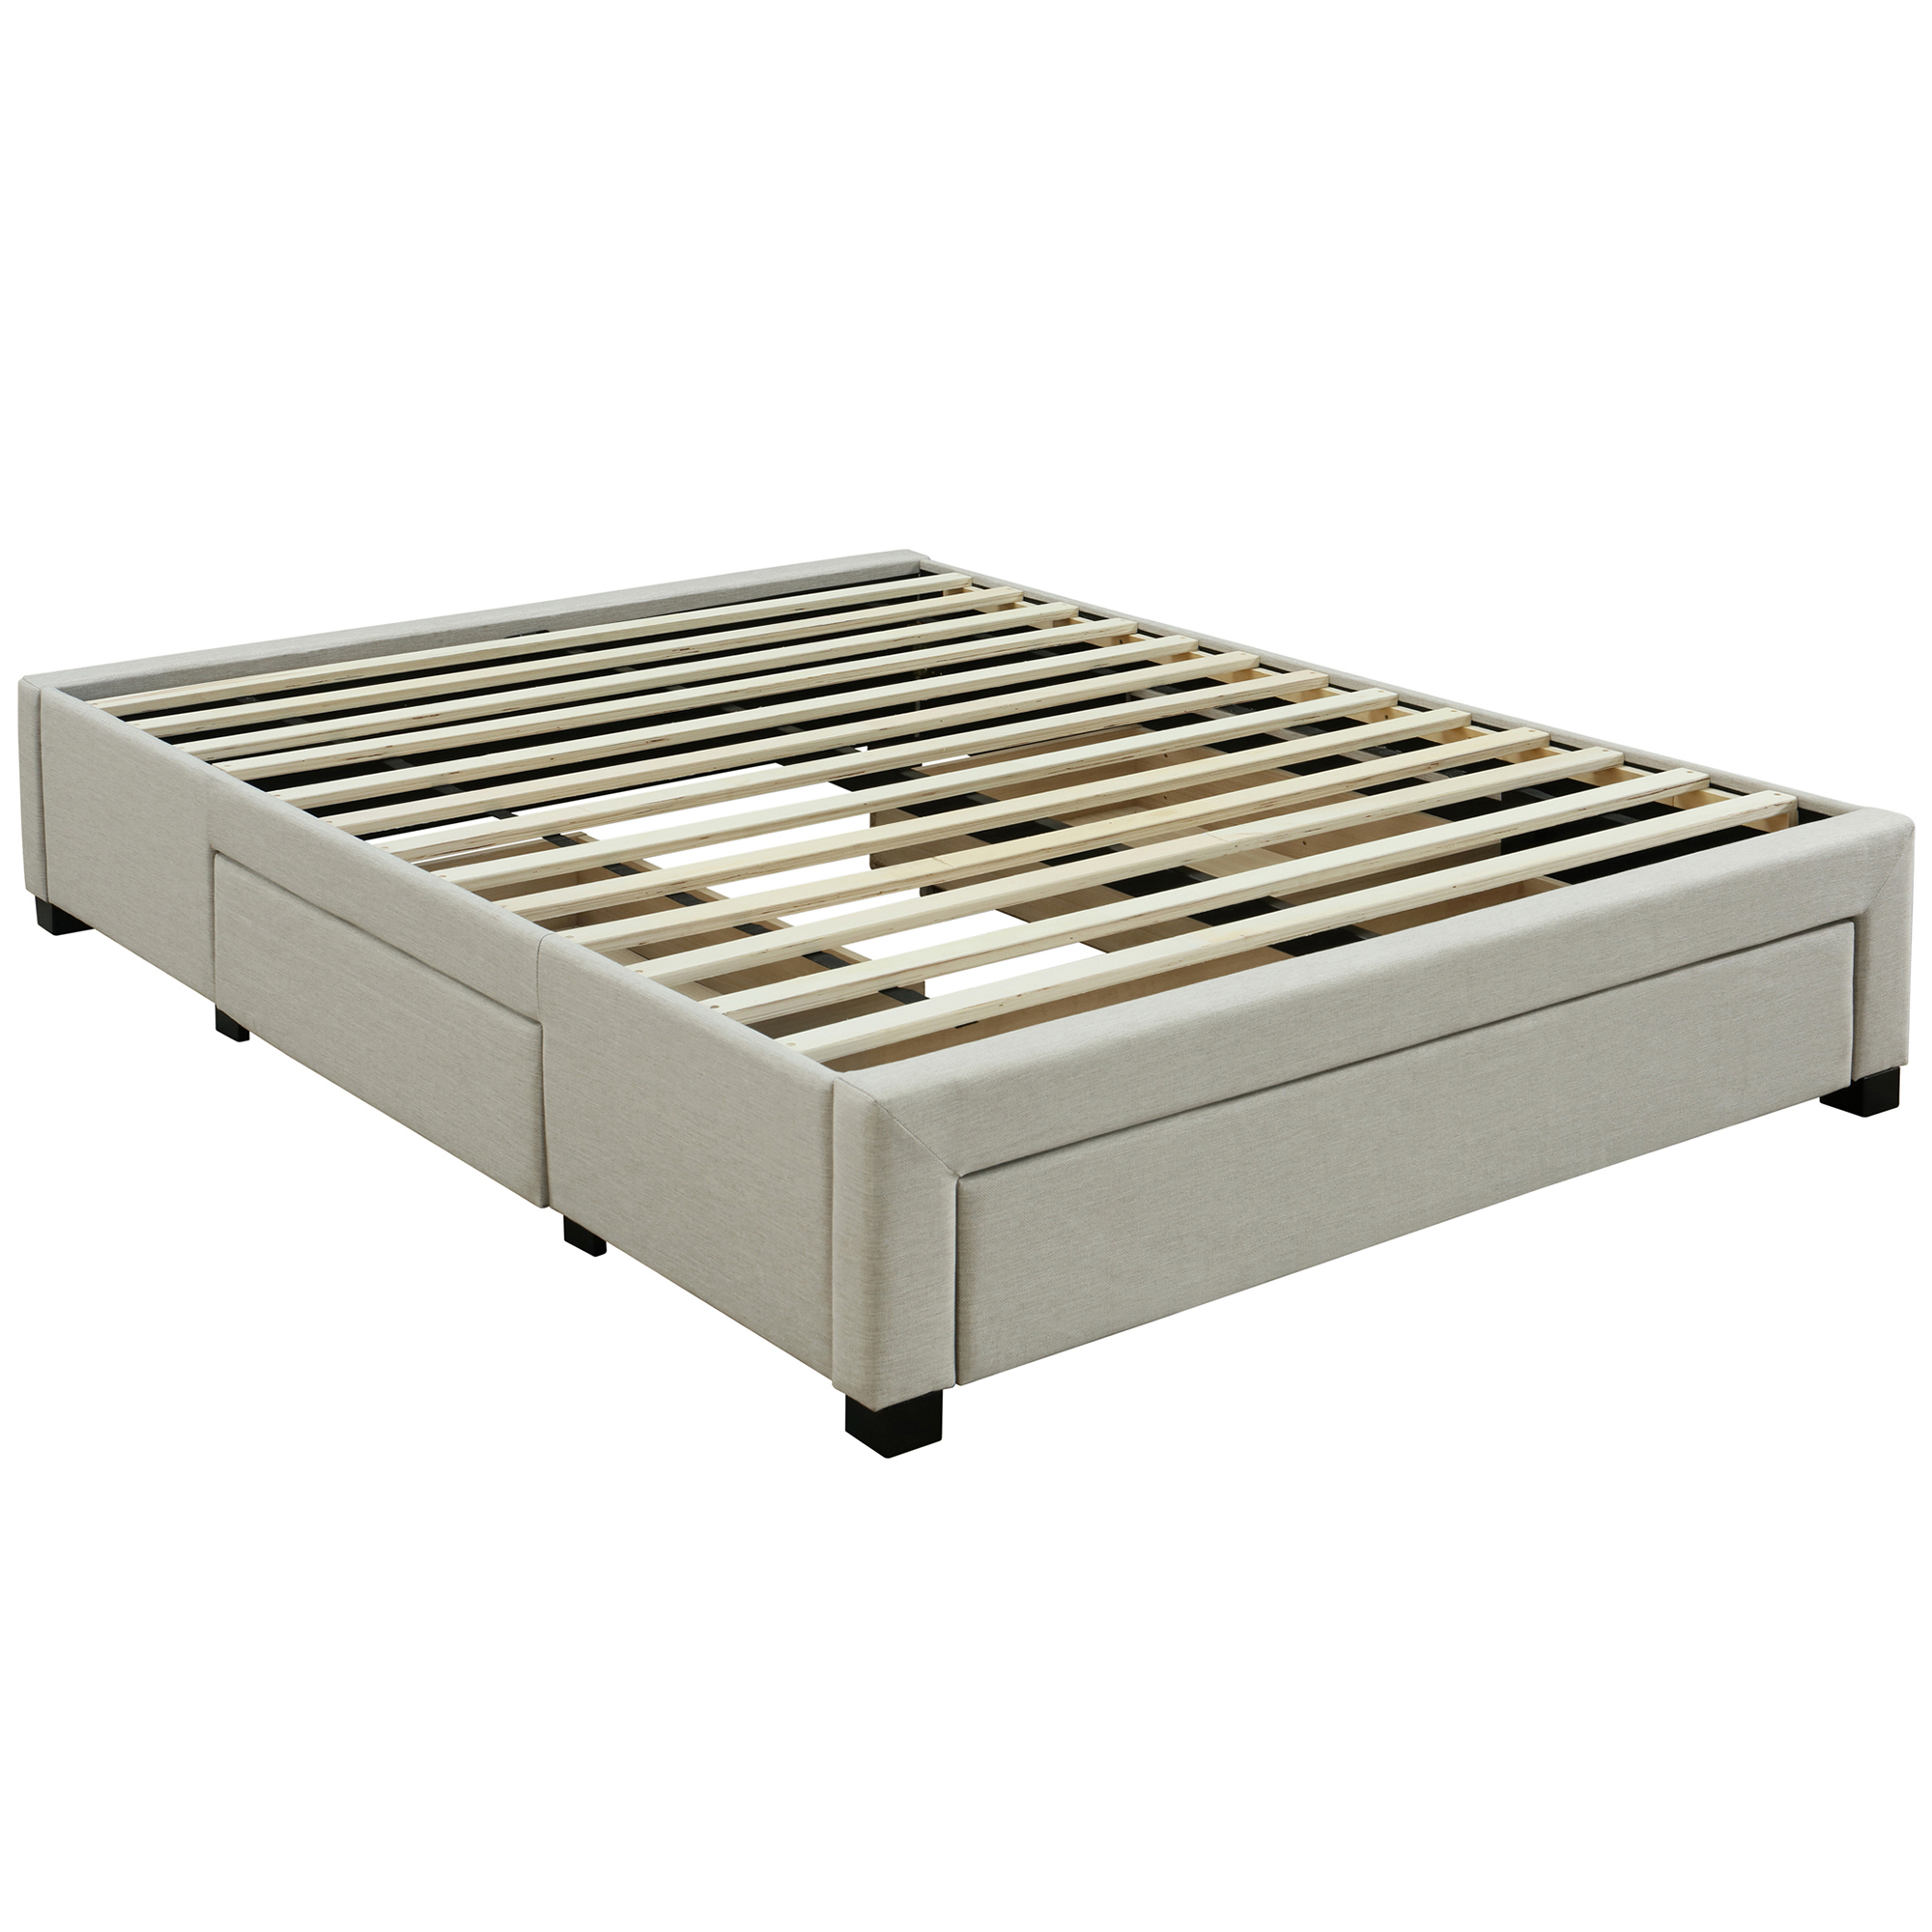 Astro Storage Bed Frame Temple Webster, Container Bed Frame